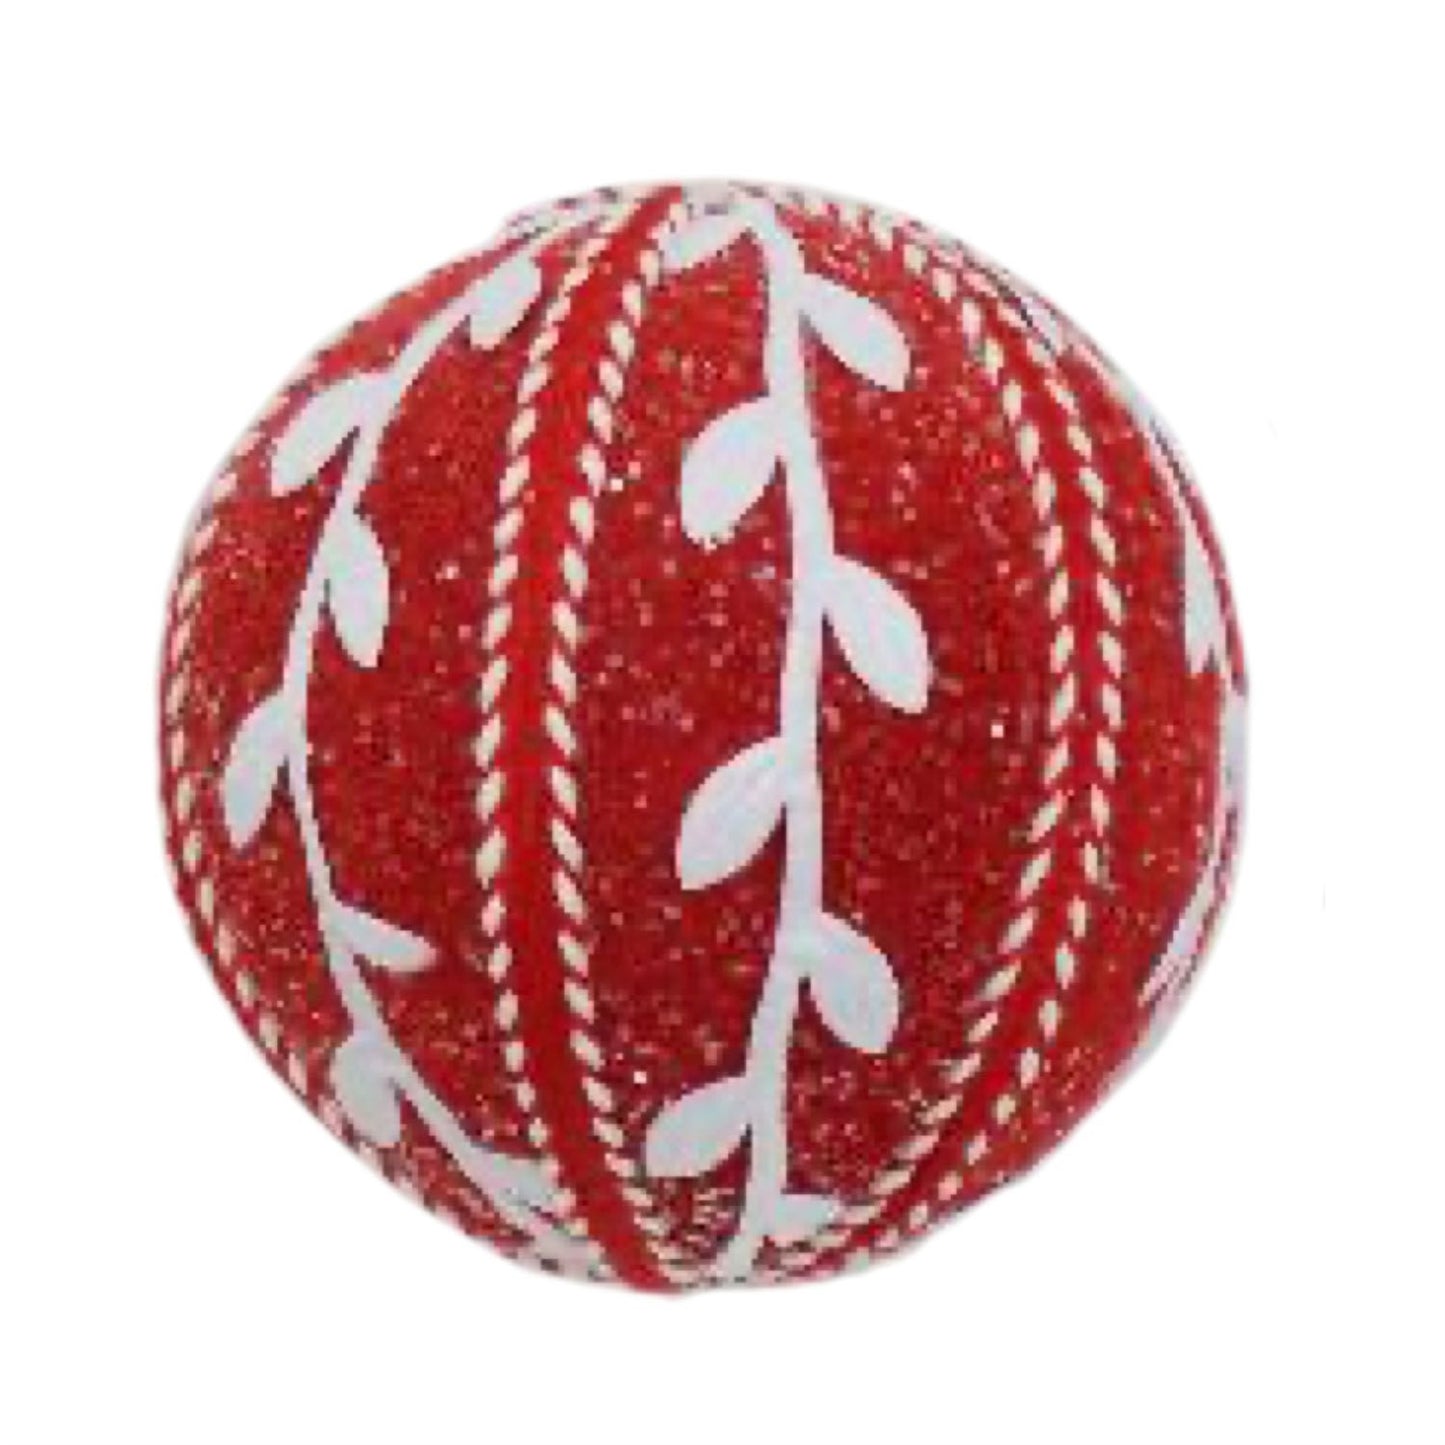 4" Vine Patterned Ball in Red/White | TA